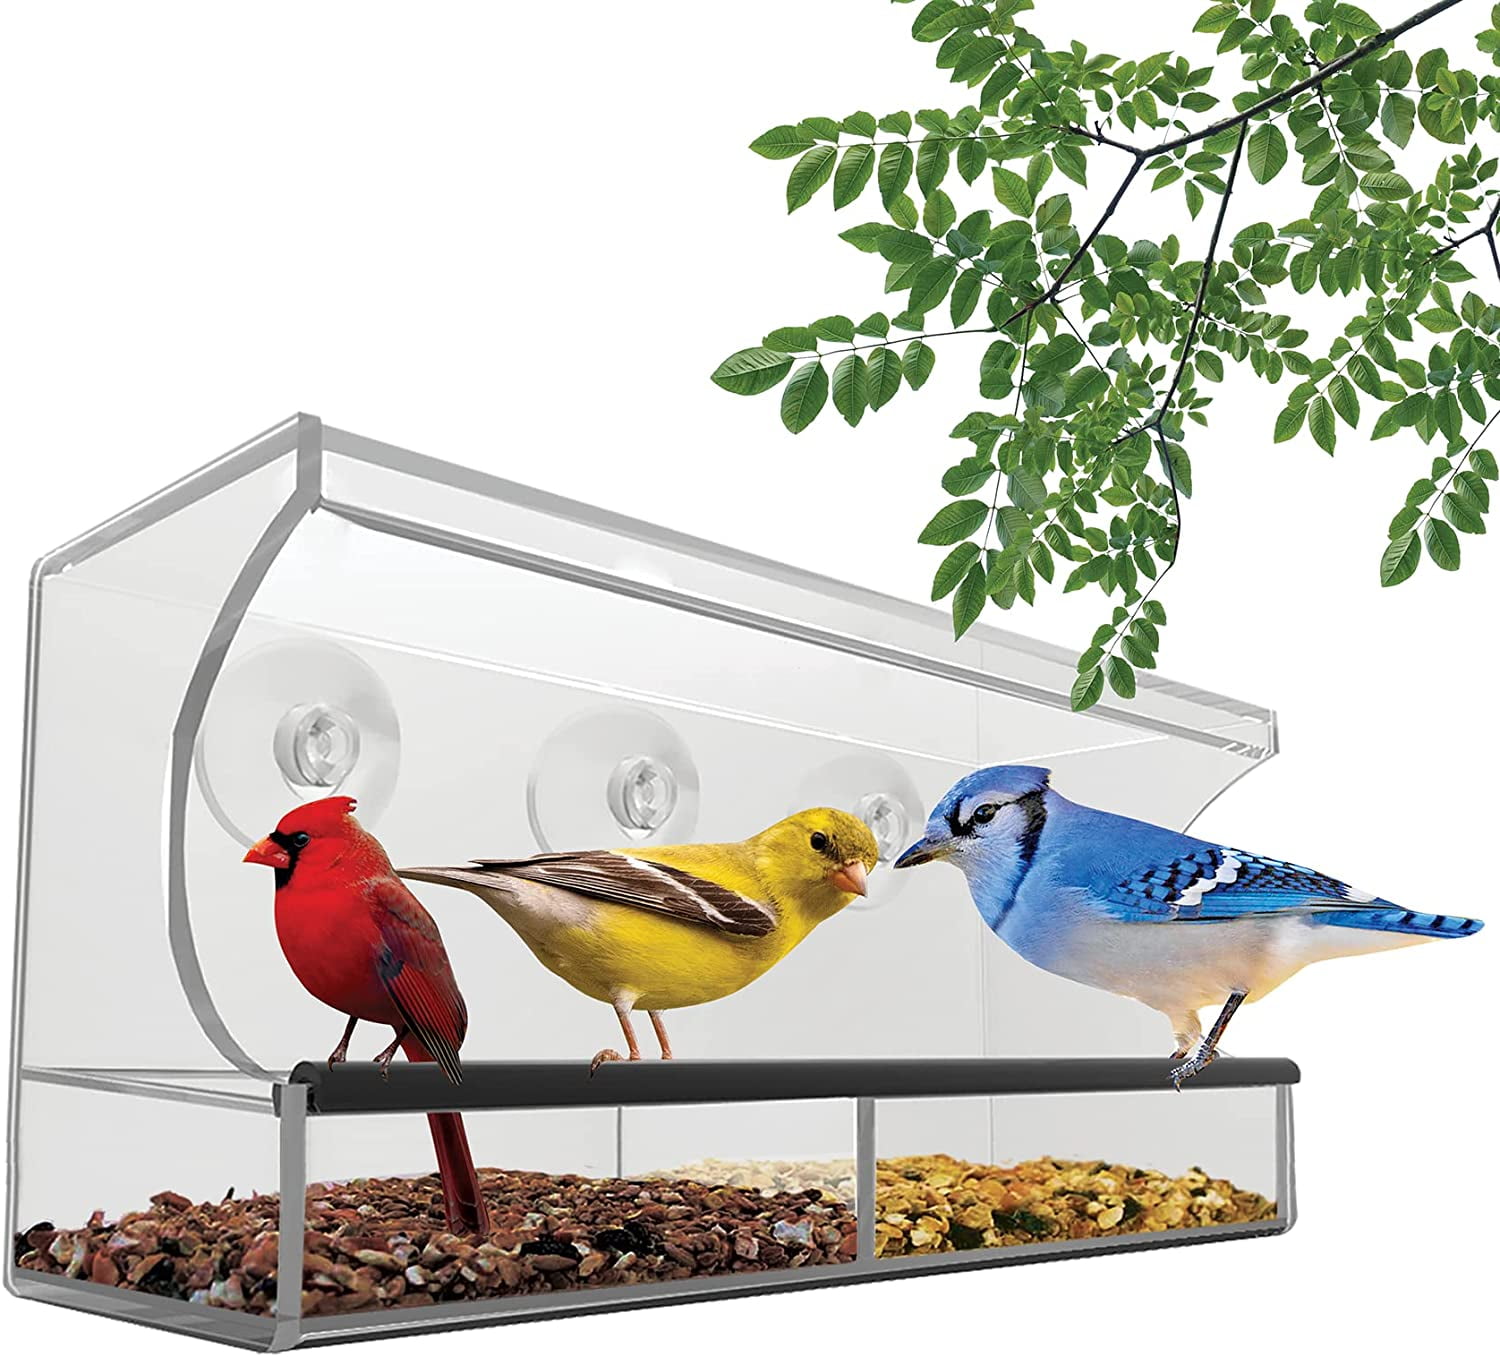 Nature's Envoy Window Bird Feeder – Clear View for Birdwatching Strong Suction Cups for Outside Acrylic Outdoor Feeder for Wild Birds Slide Out Seed Tray w/ Drain Holes for Easy Refill & Clean 